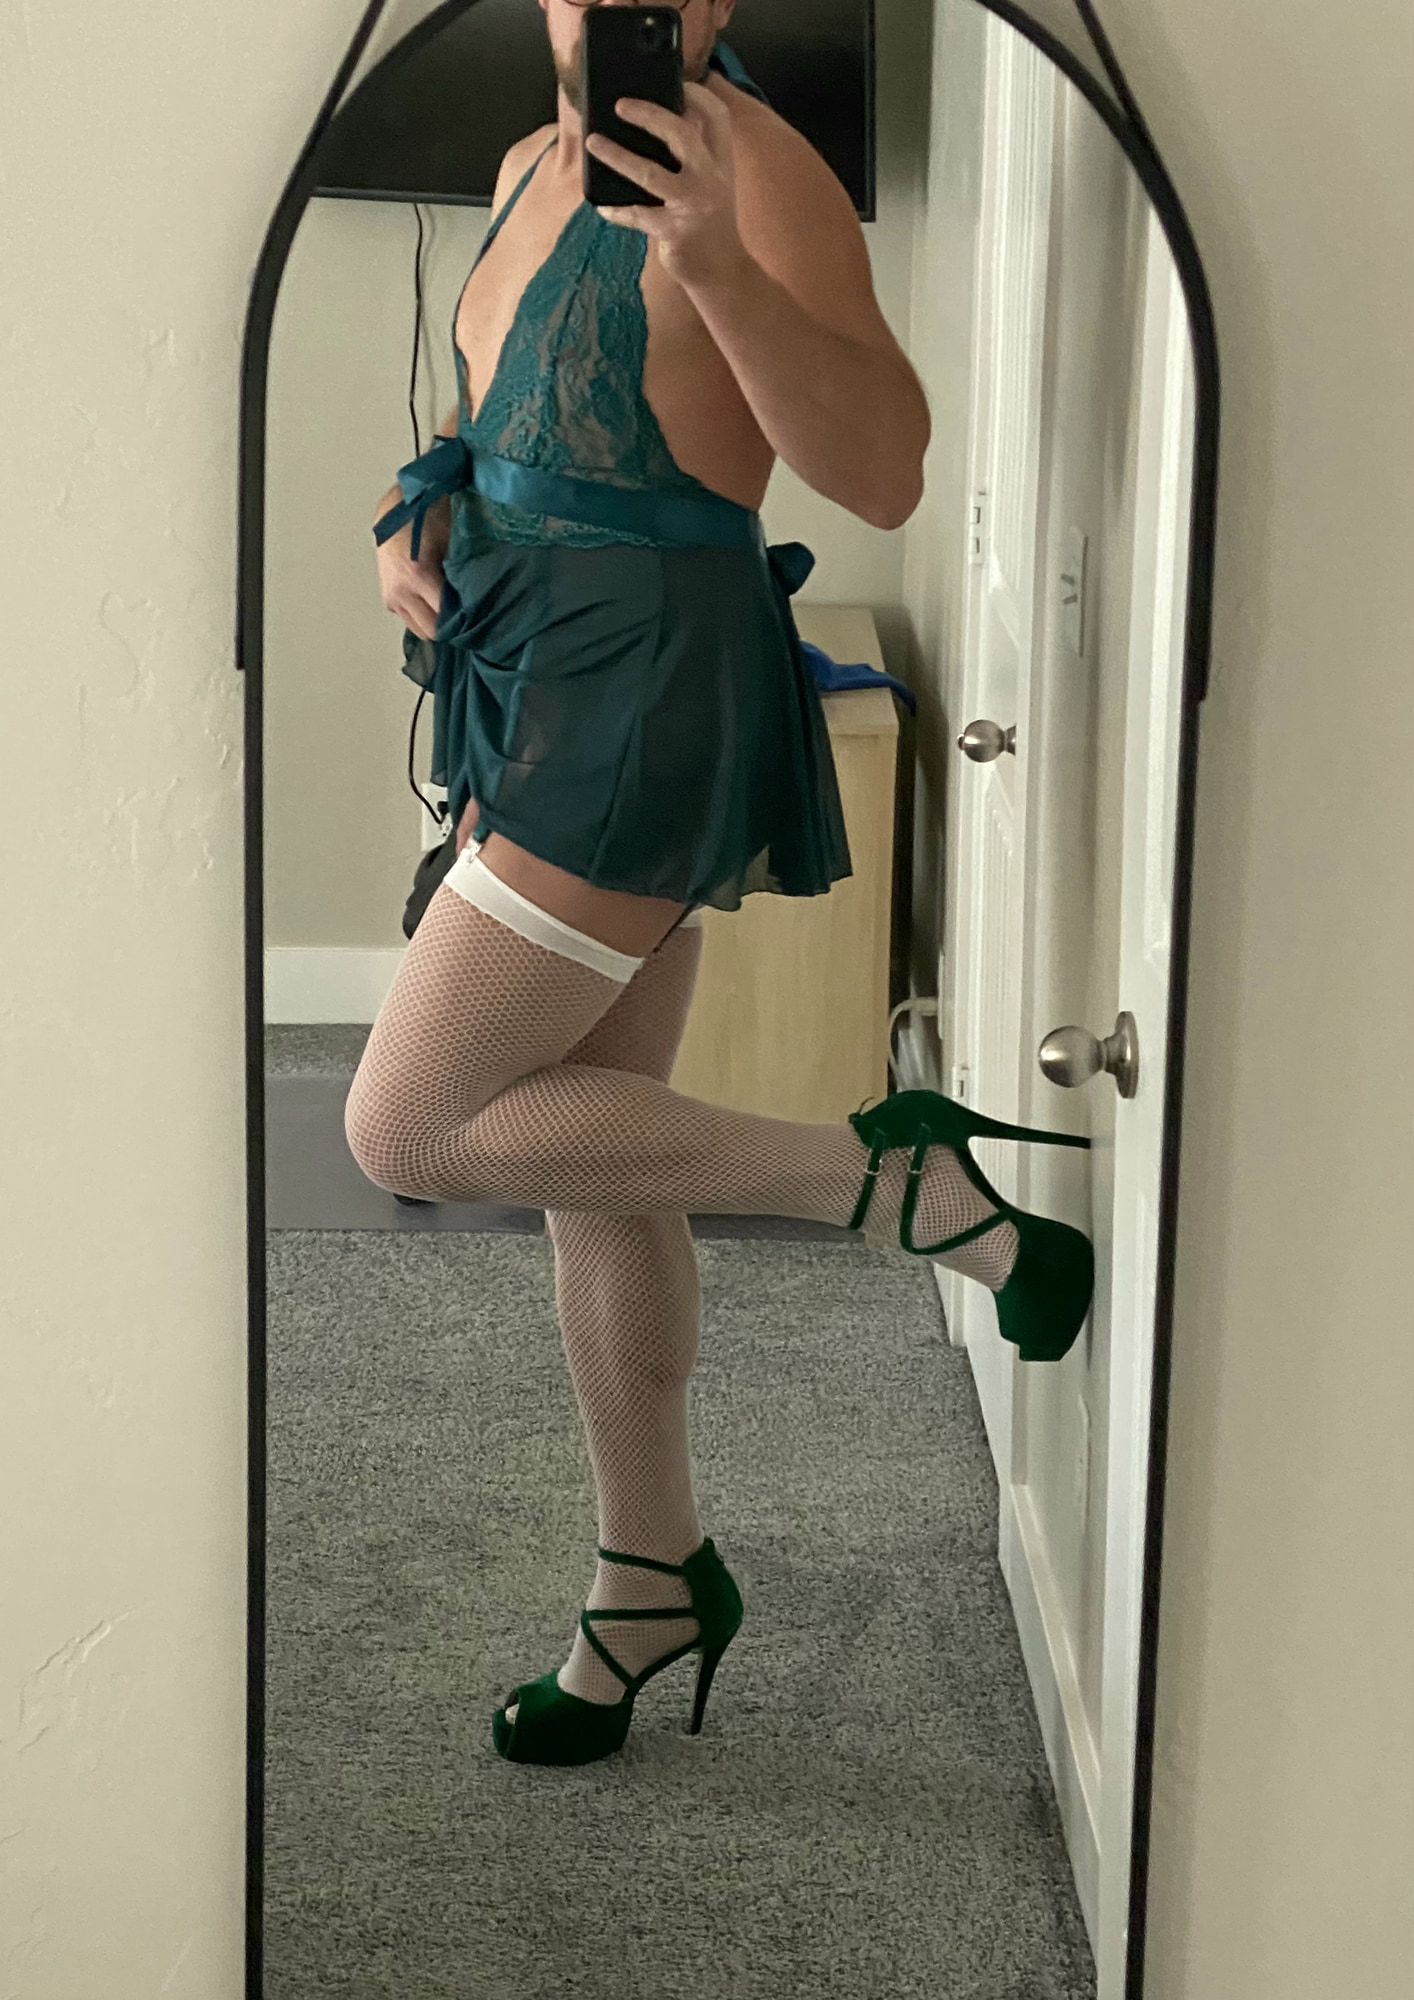 Green Lingerie and Heels seduction #26